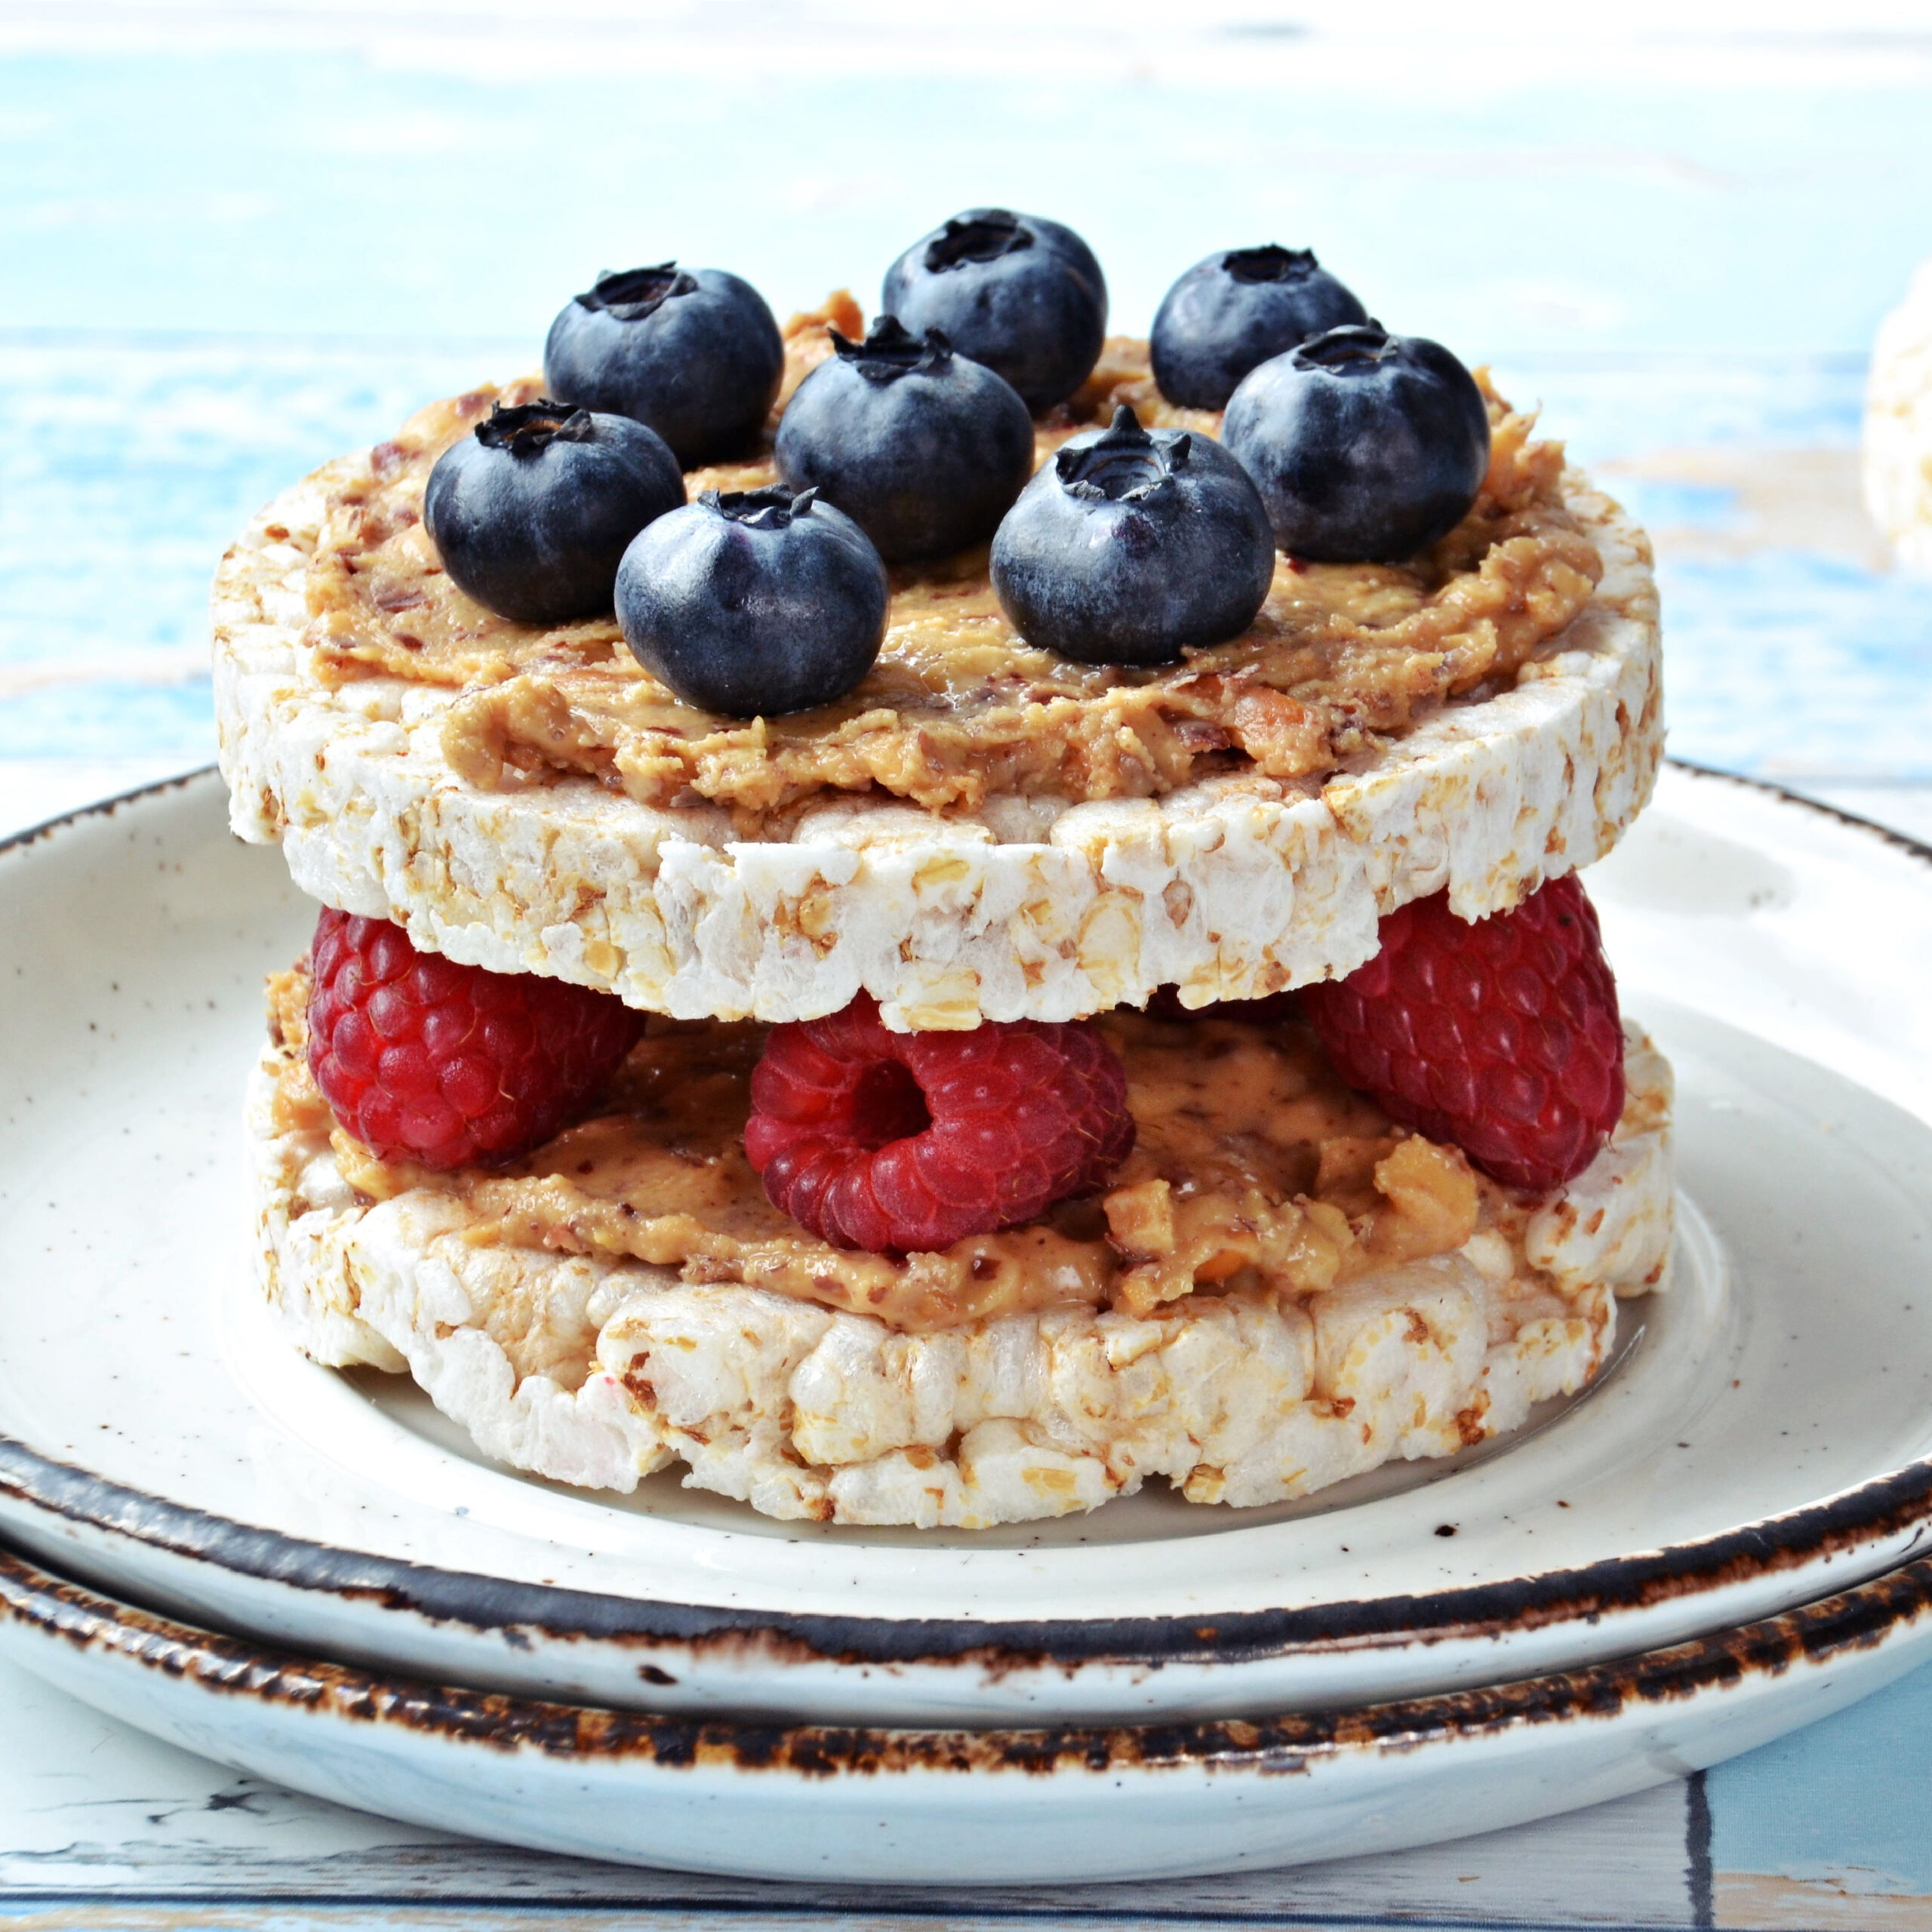 rice cakes with nut butter and berries